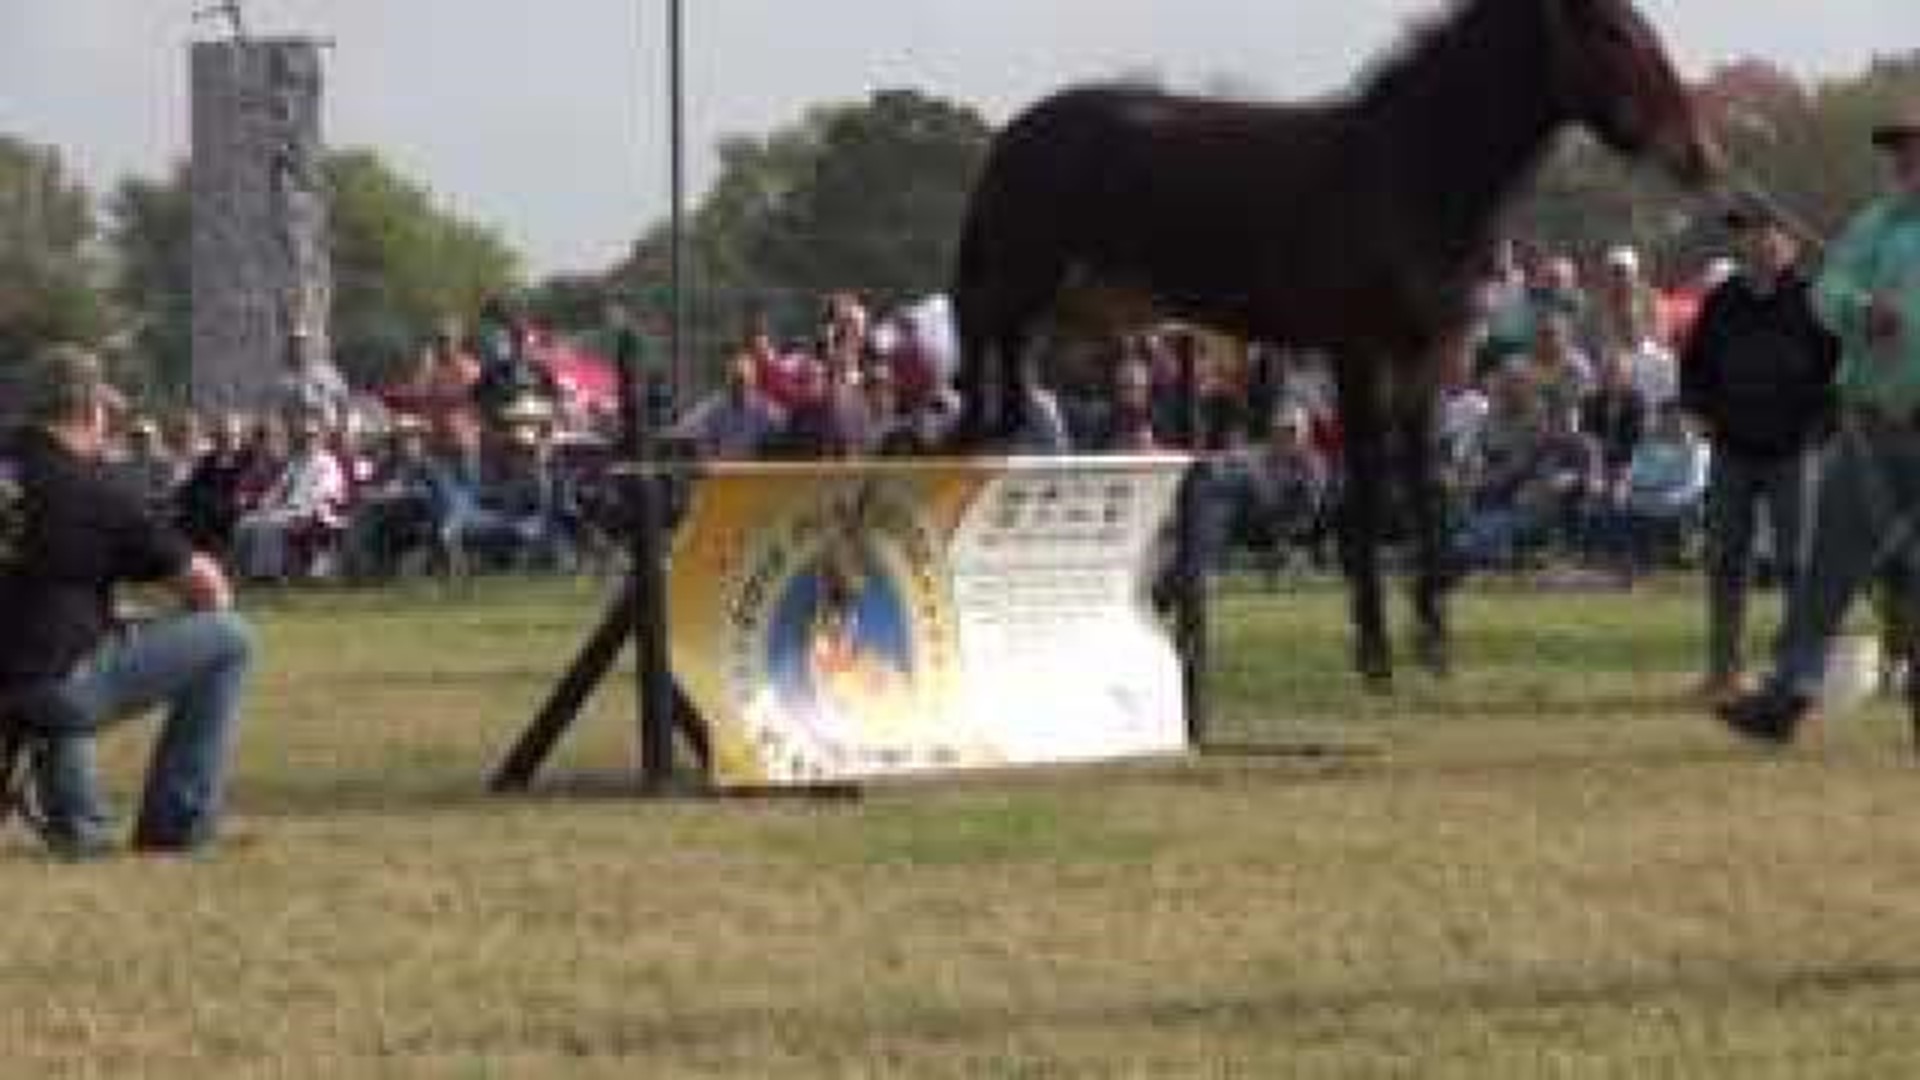 Jumping Mules Steal the Show in Pea Ridge